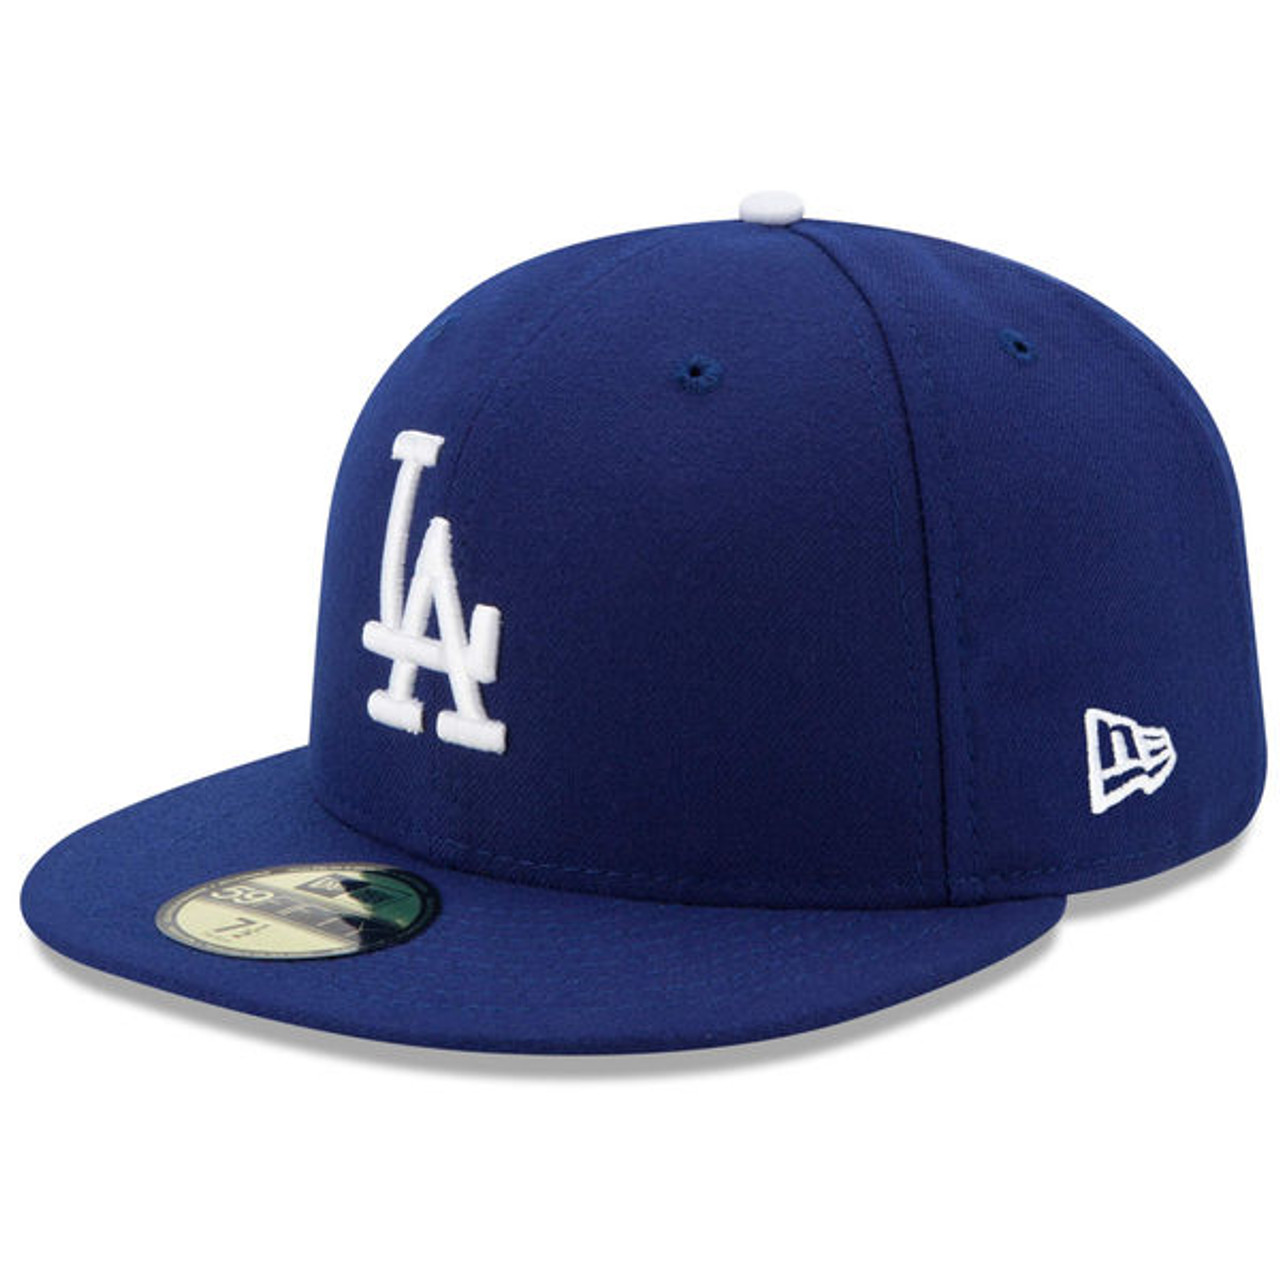 Men's New Era Royal Los Angeles Dodgers White Logo 59FIFTY Fitted